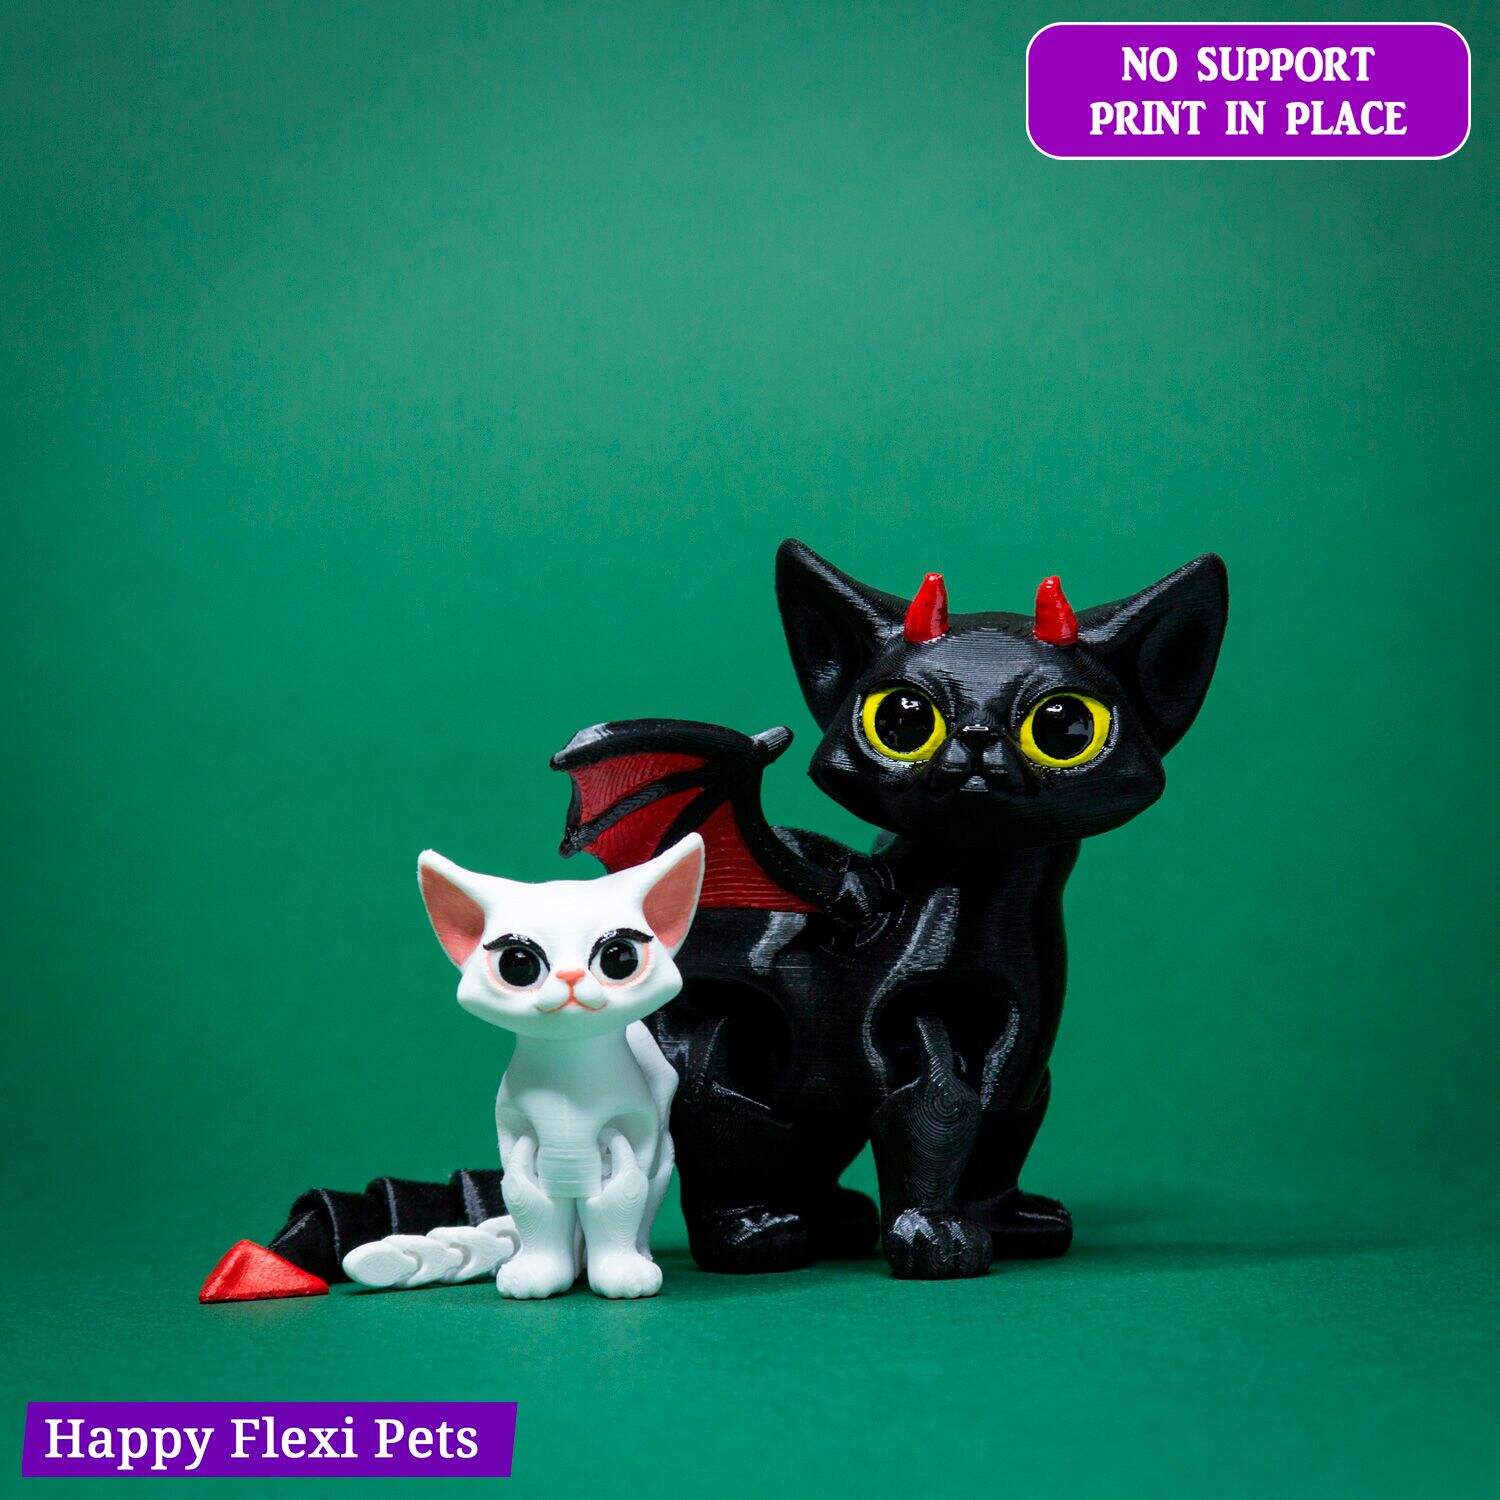 Malacoda the demon cat - articulated toy by Happy Flexi pets